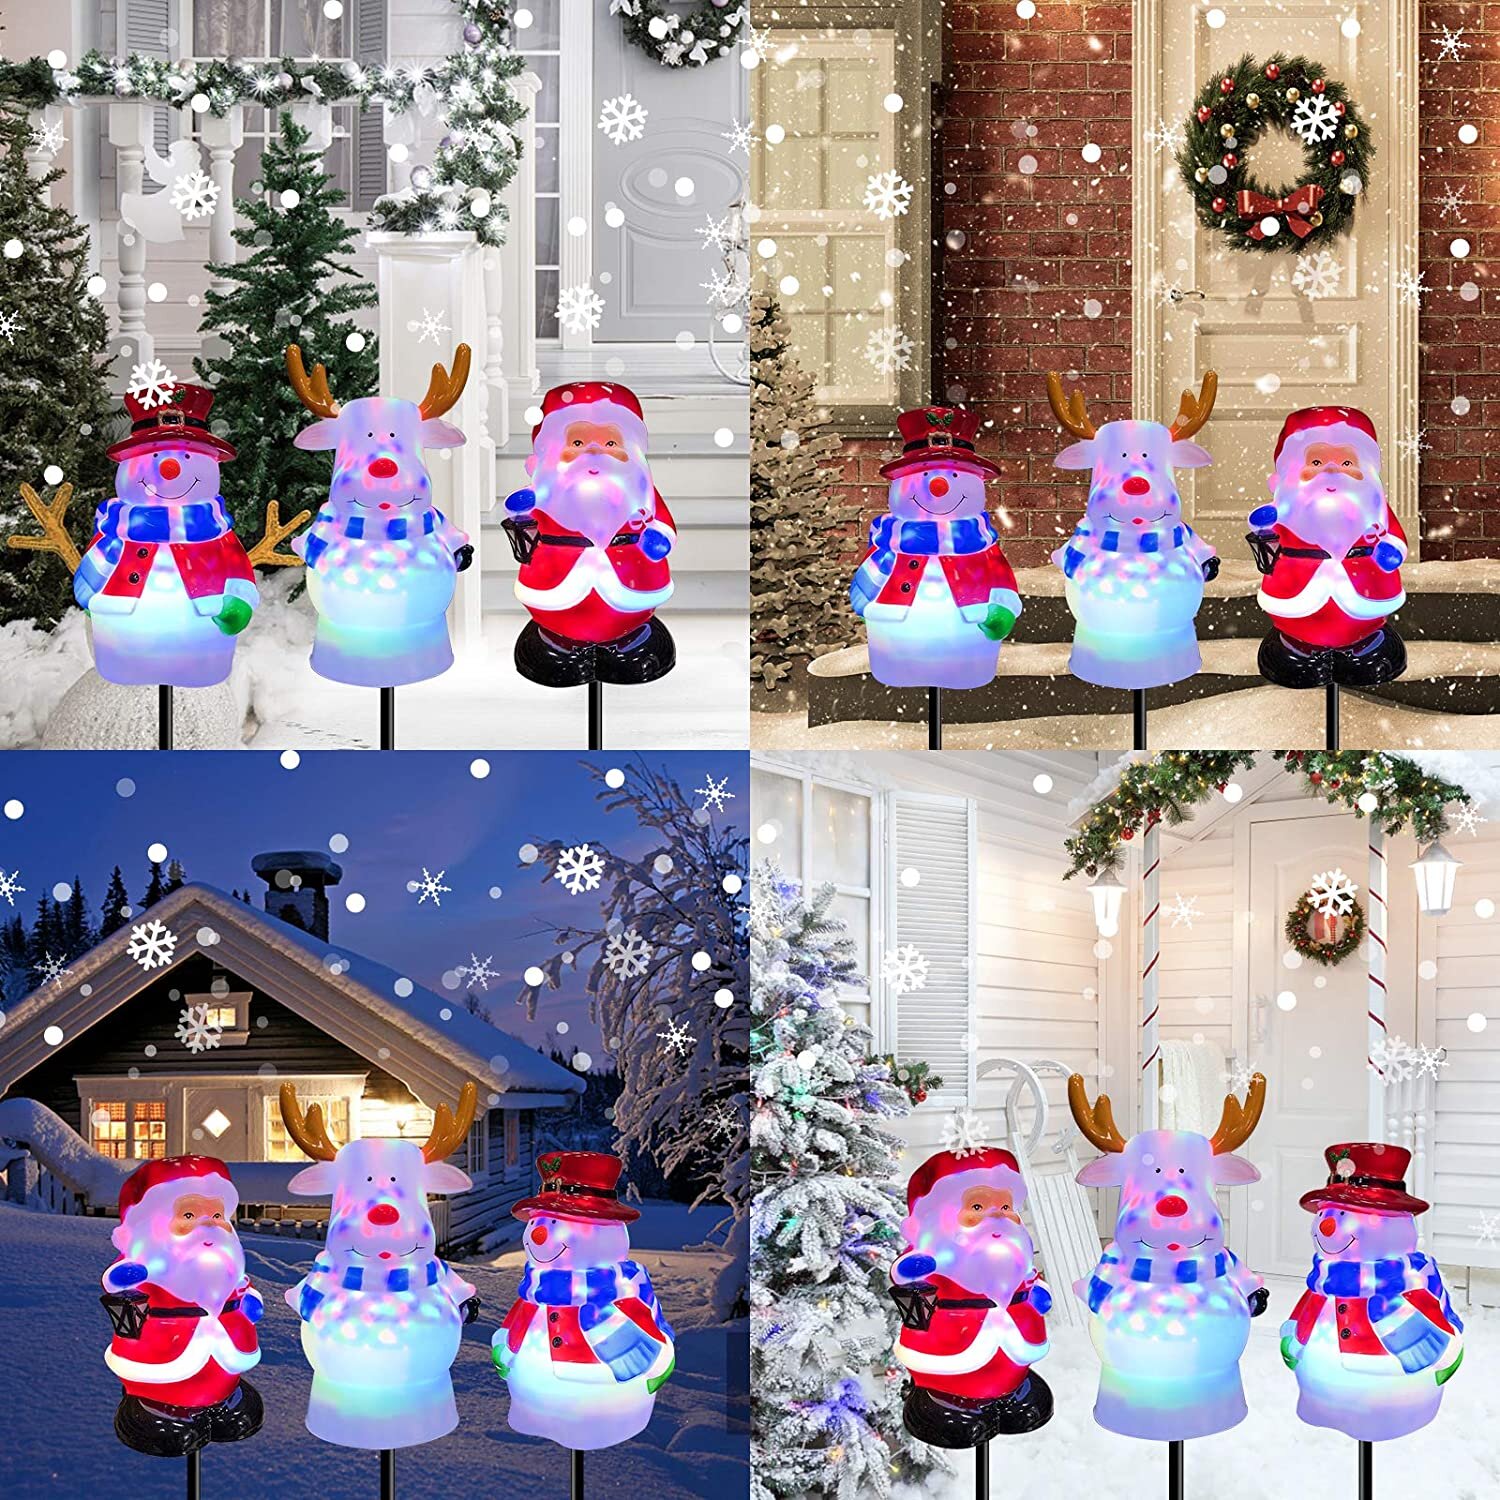 Christmas Decorations Solar Lights Outdoor,2 Pack Snowman Santa Landscape Stake Garden Lights Waterproof in Winter Festival Ornaments LED Lights for Yard Patio Pathway